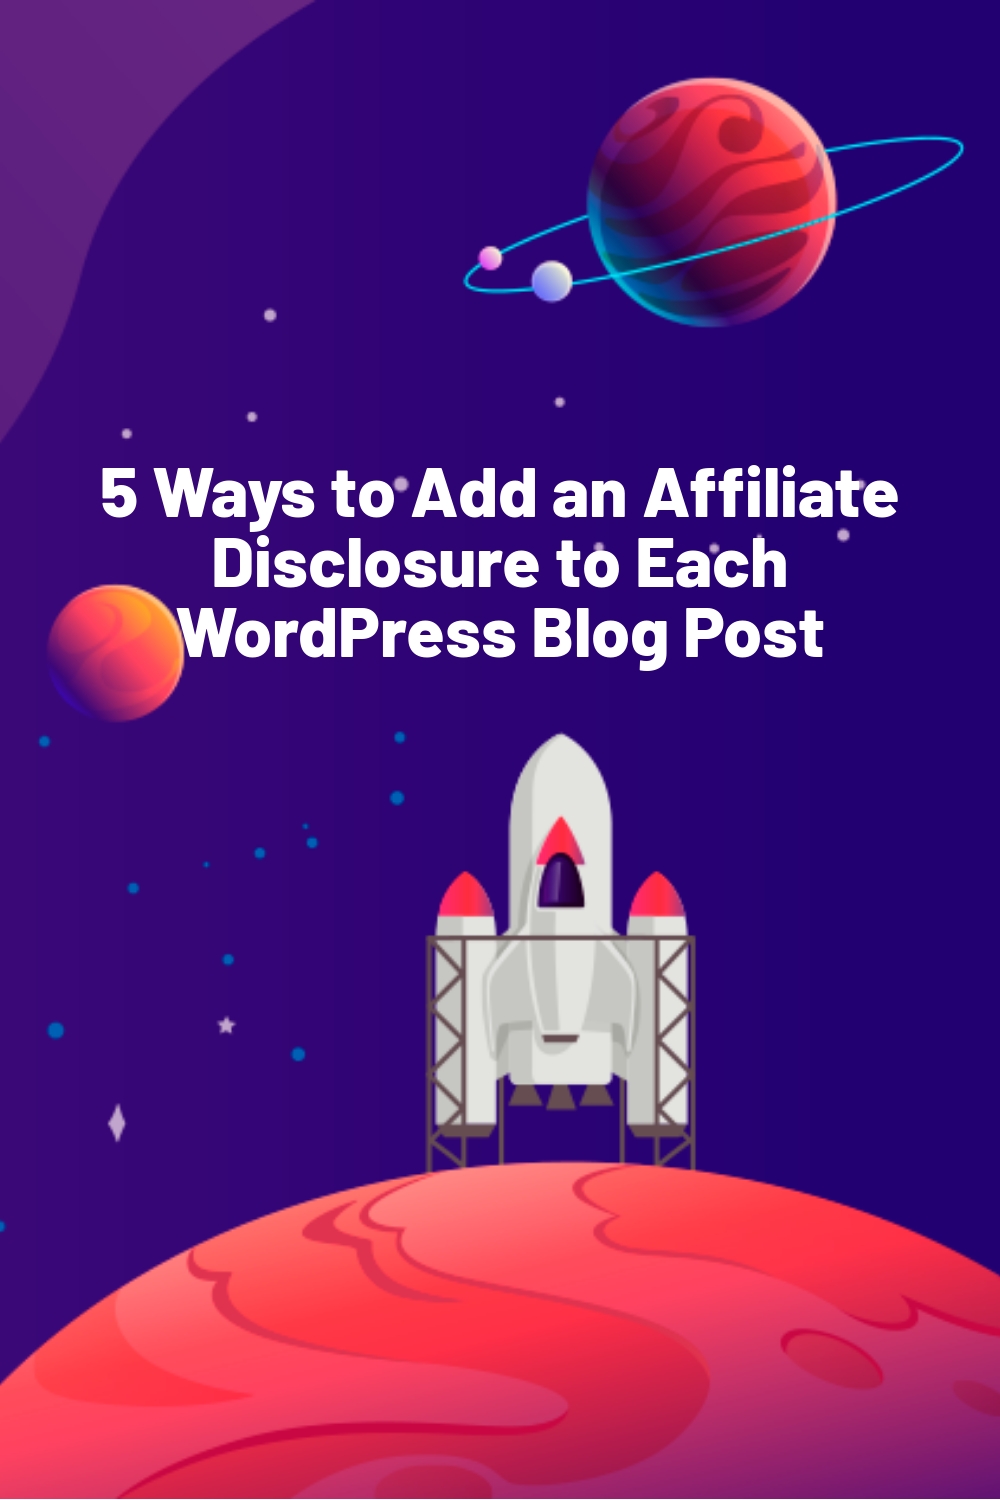 5 Ways to Add an Affiliate Disclosure to Each WordPress Blog Post